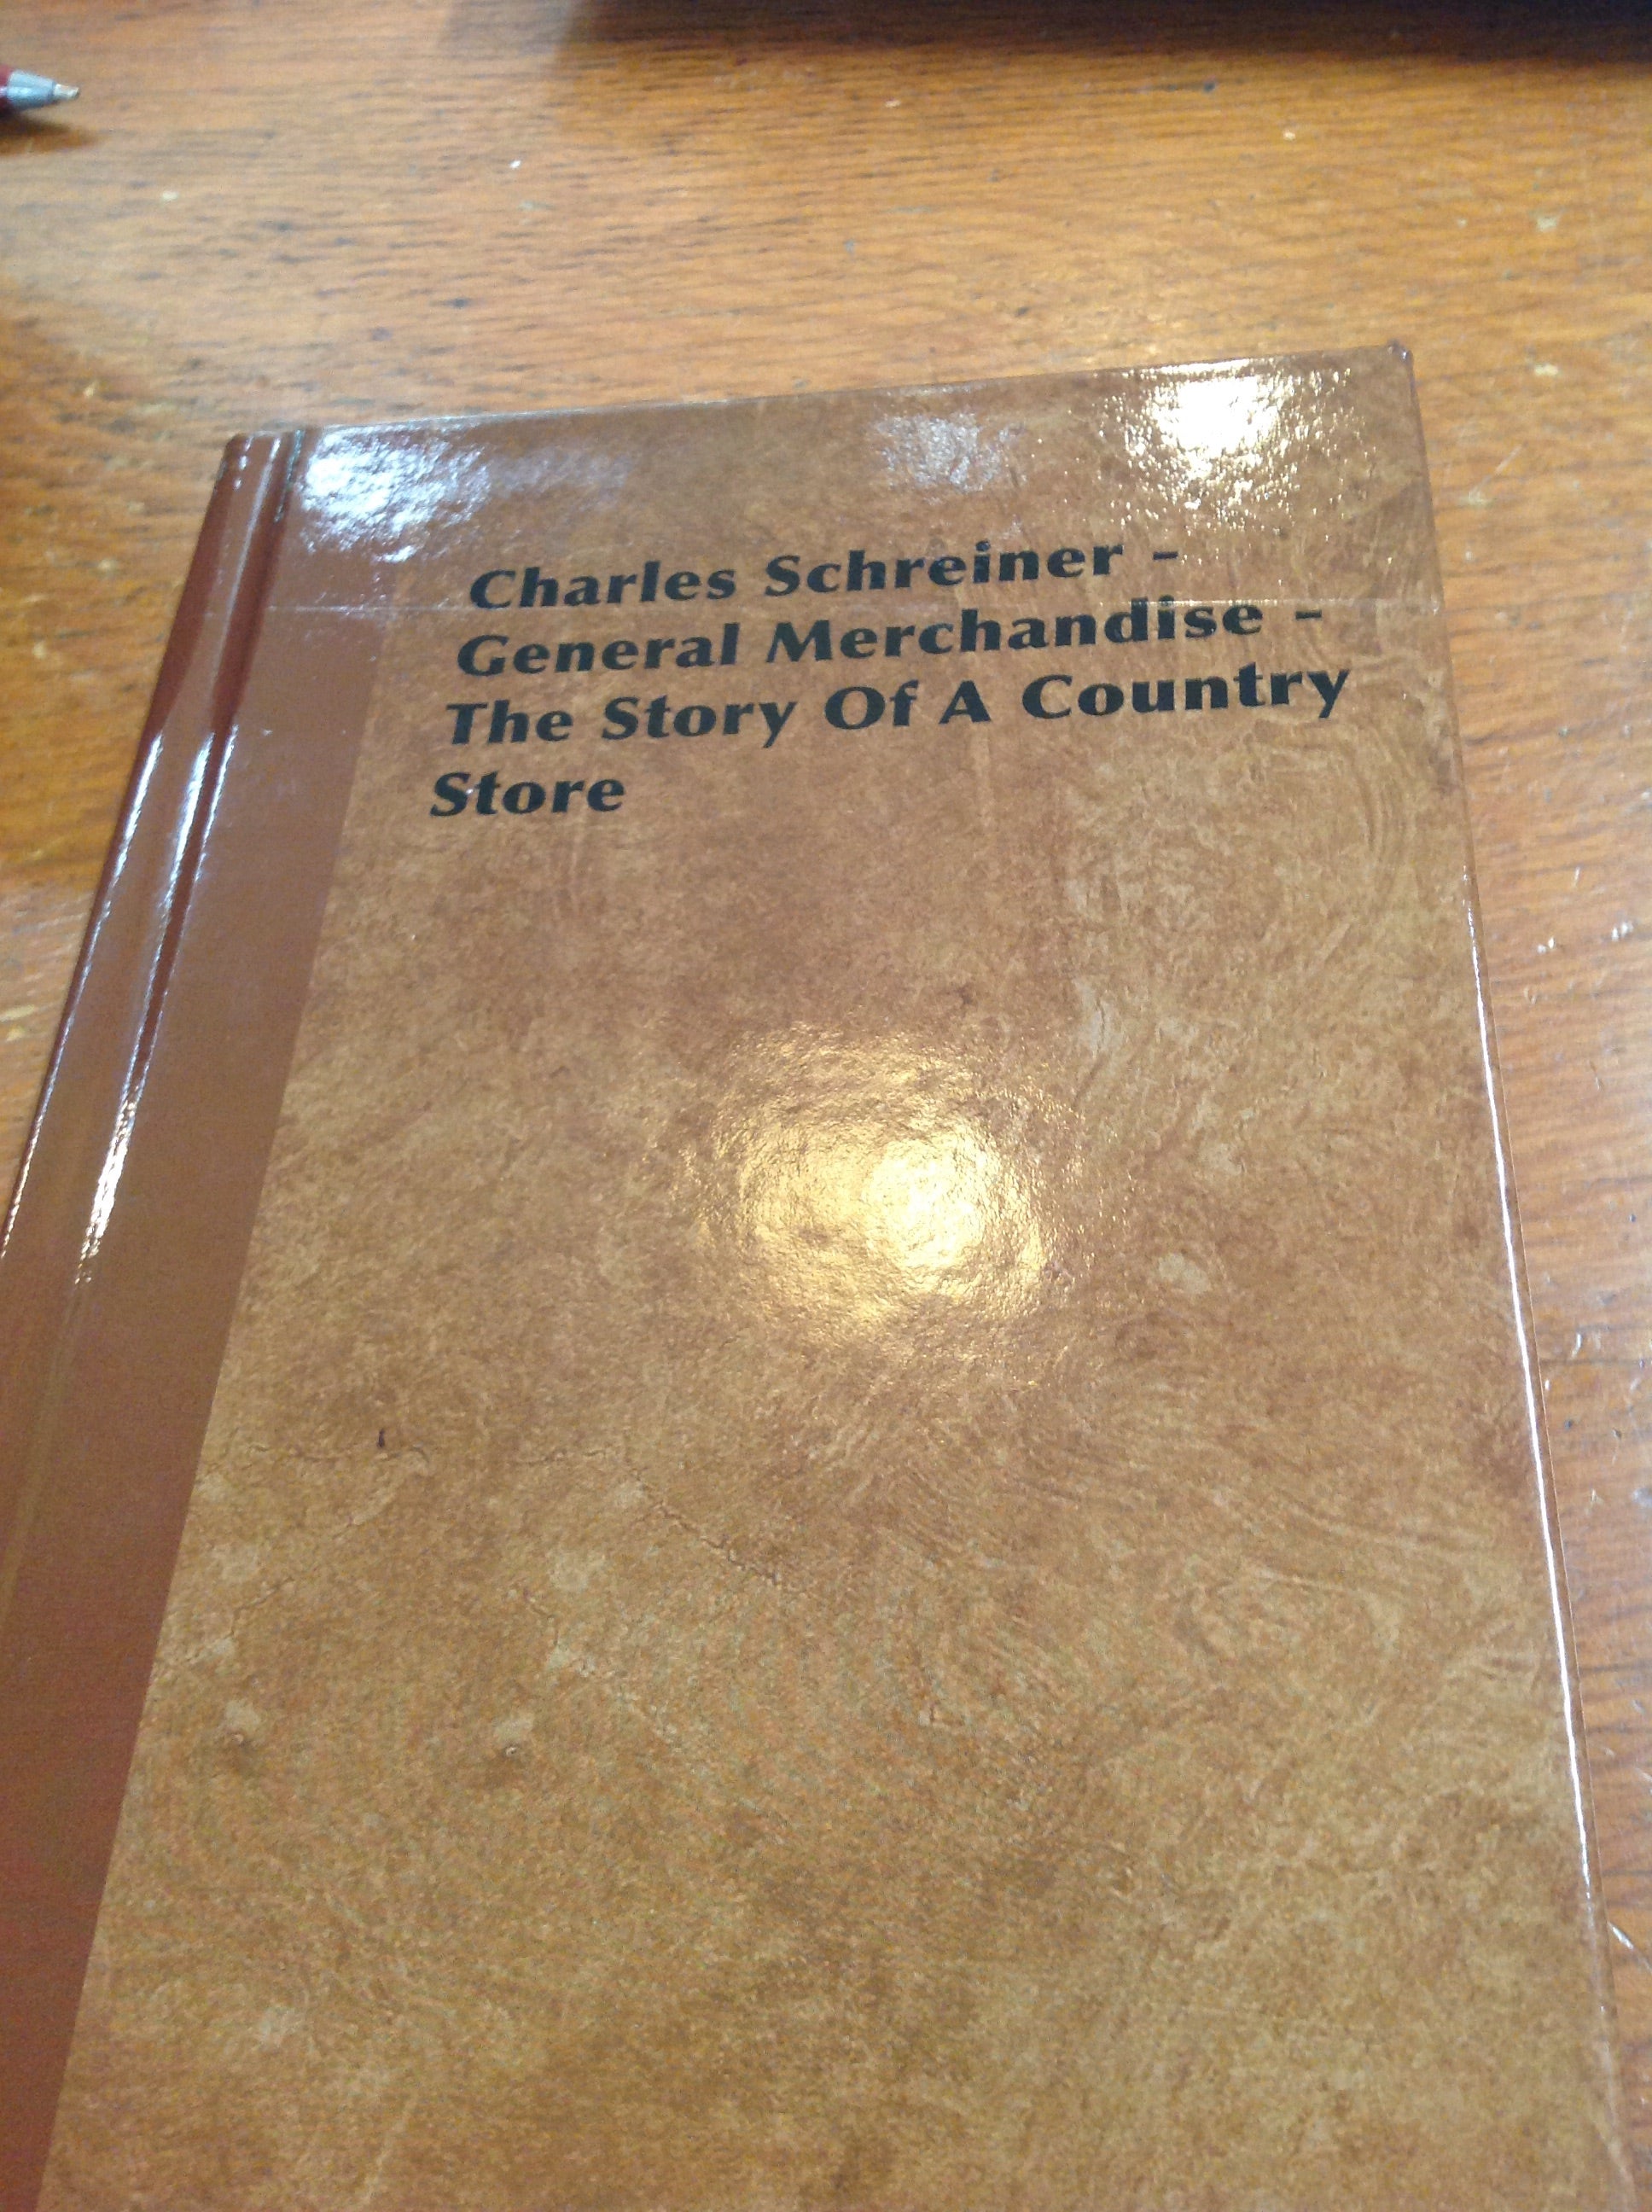 BOOKS - Charles Schreiner - General Merchandise - The story of a country store